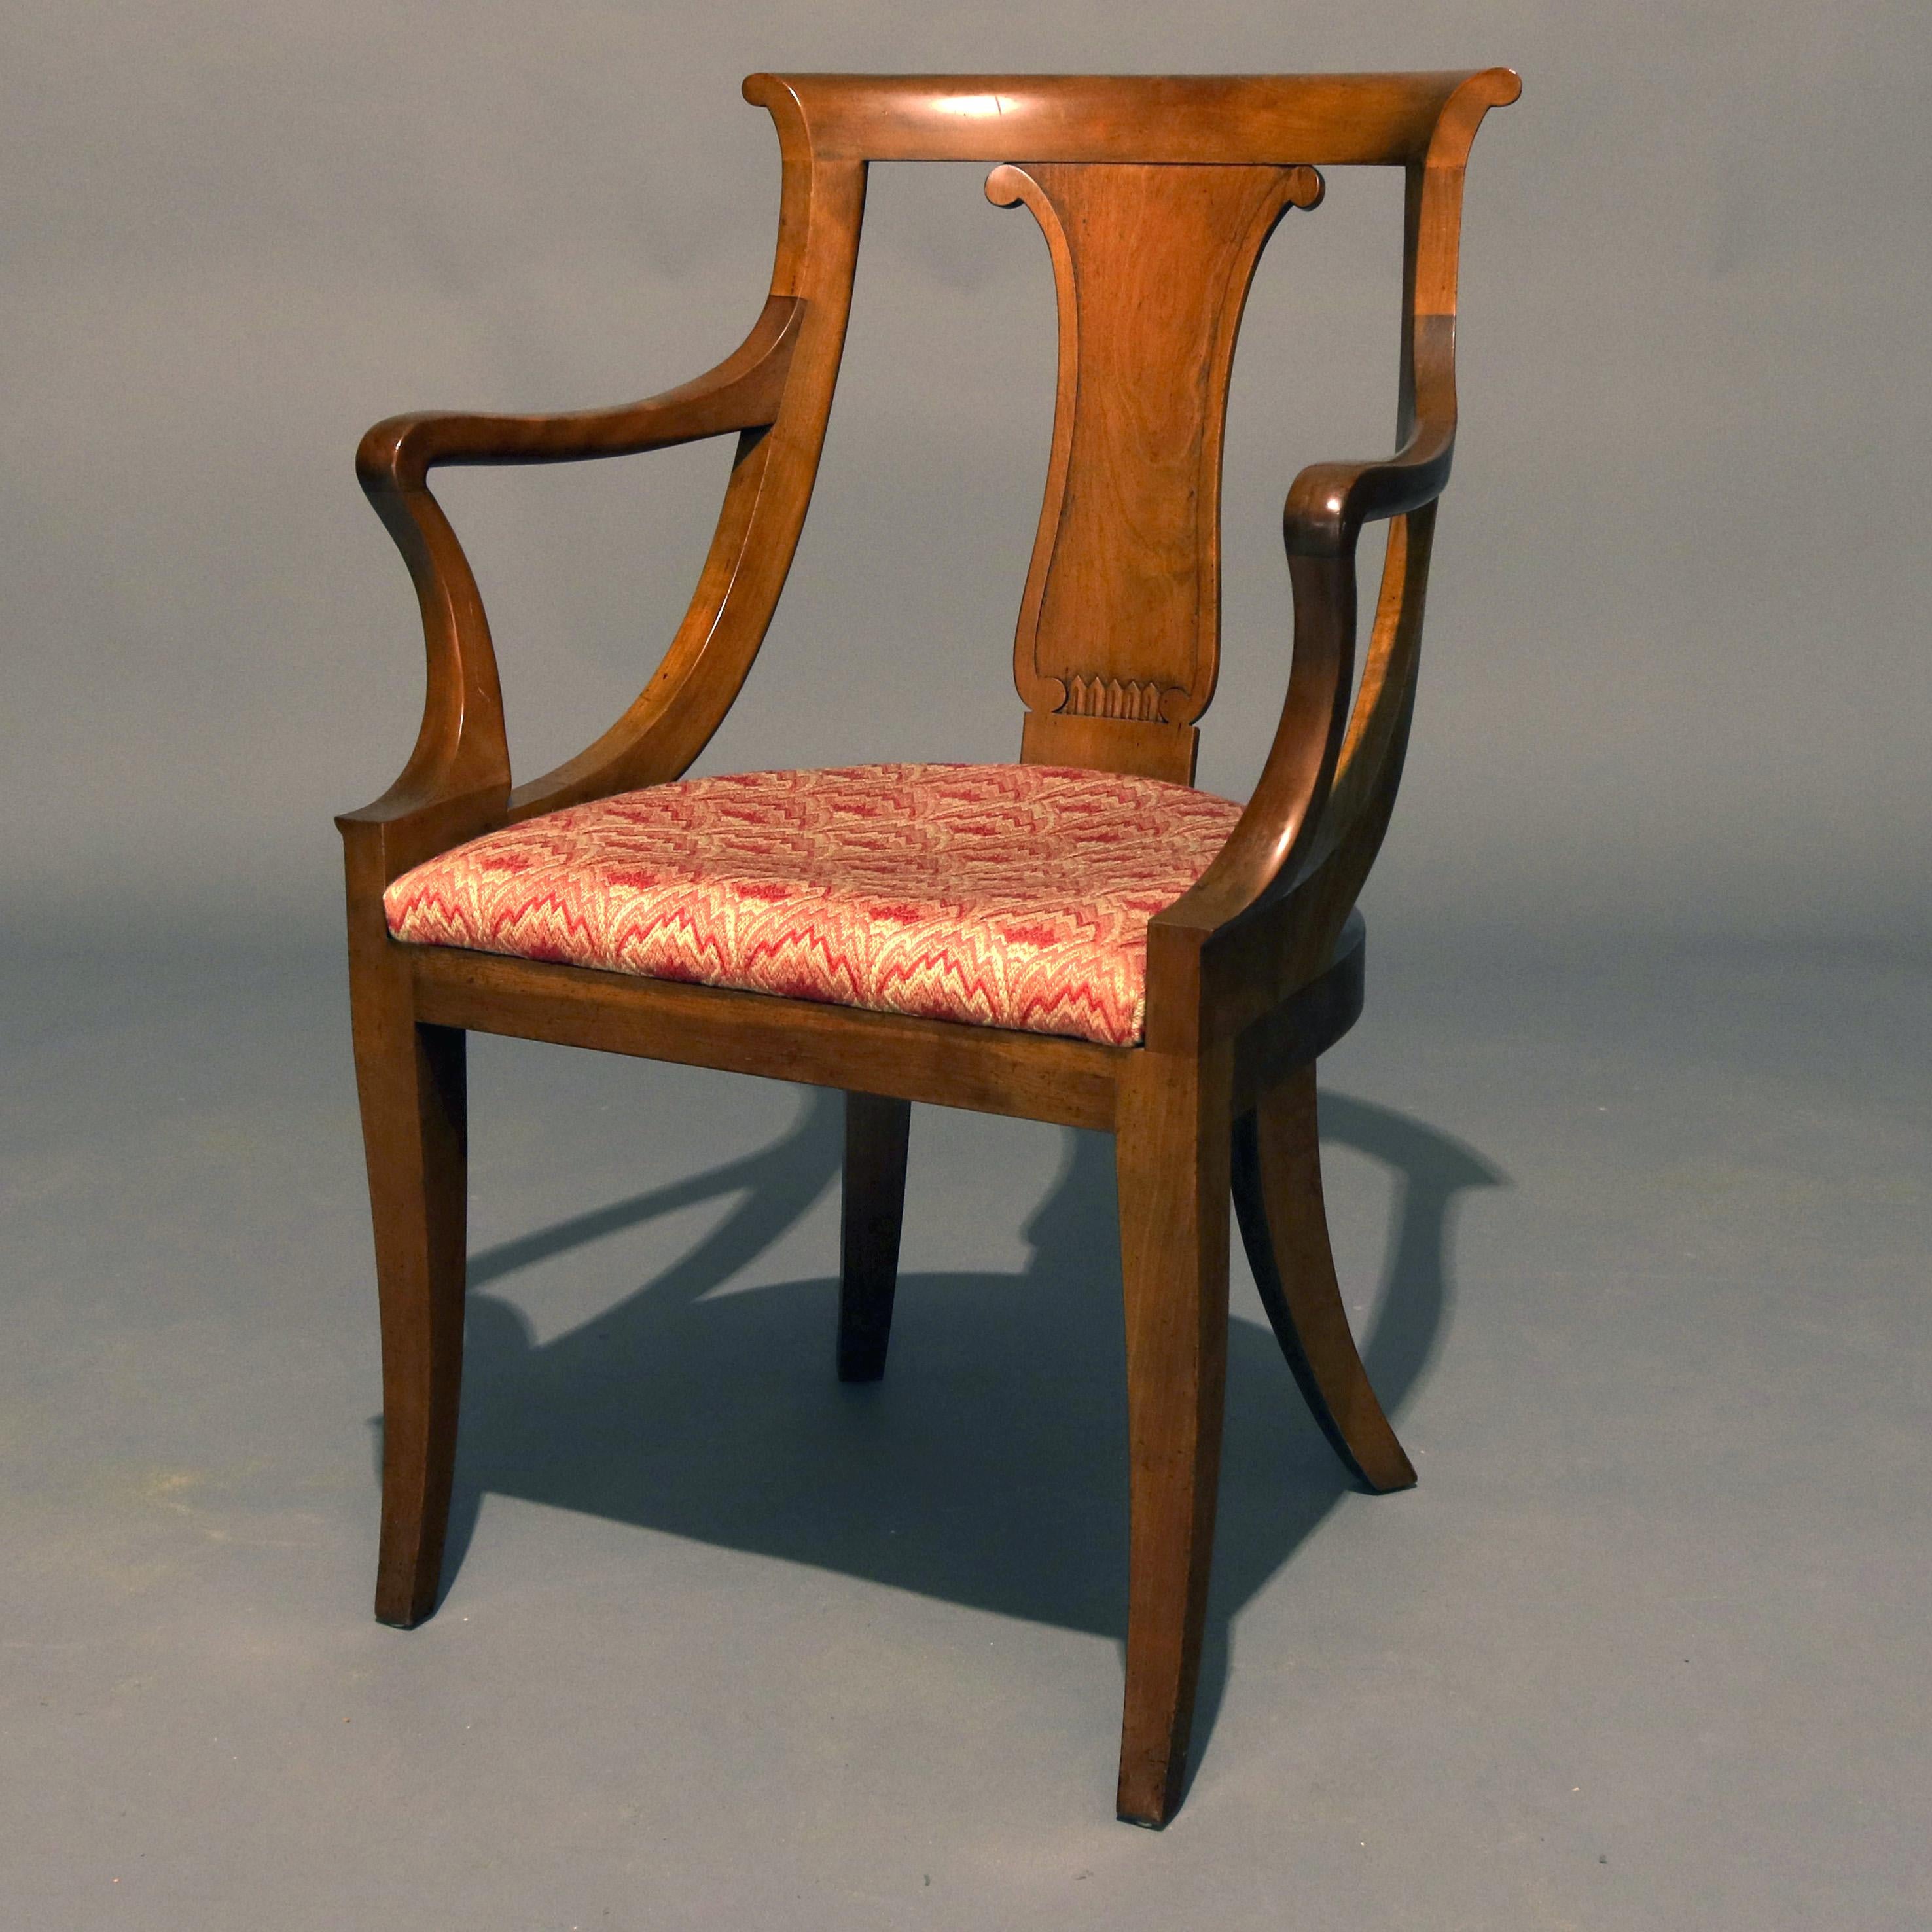 Set of 6 Mid-Century Modern upholstered mahogany Gondola style dining chairs feature incised slat and curved backs with upholstered seat and raised on tapered legs, 20th century. Set includes two armchairs and four side chairs.

Measures - 35